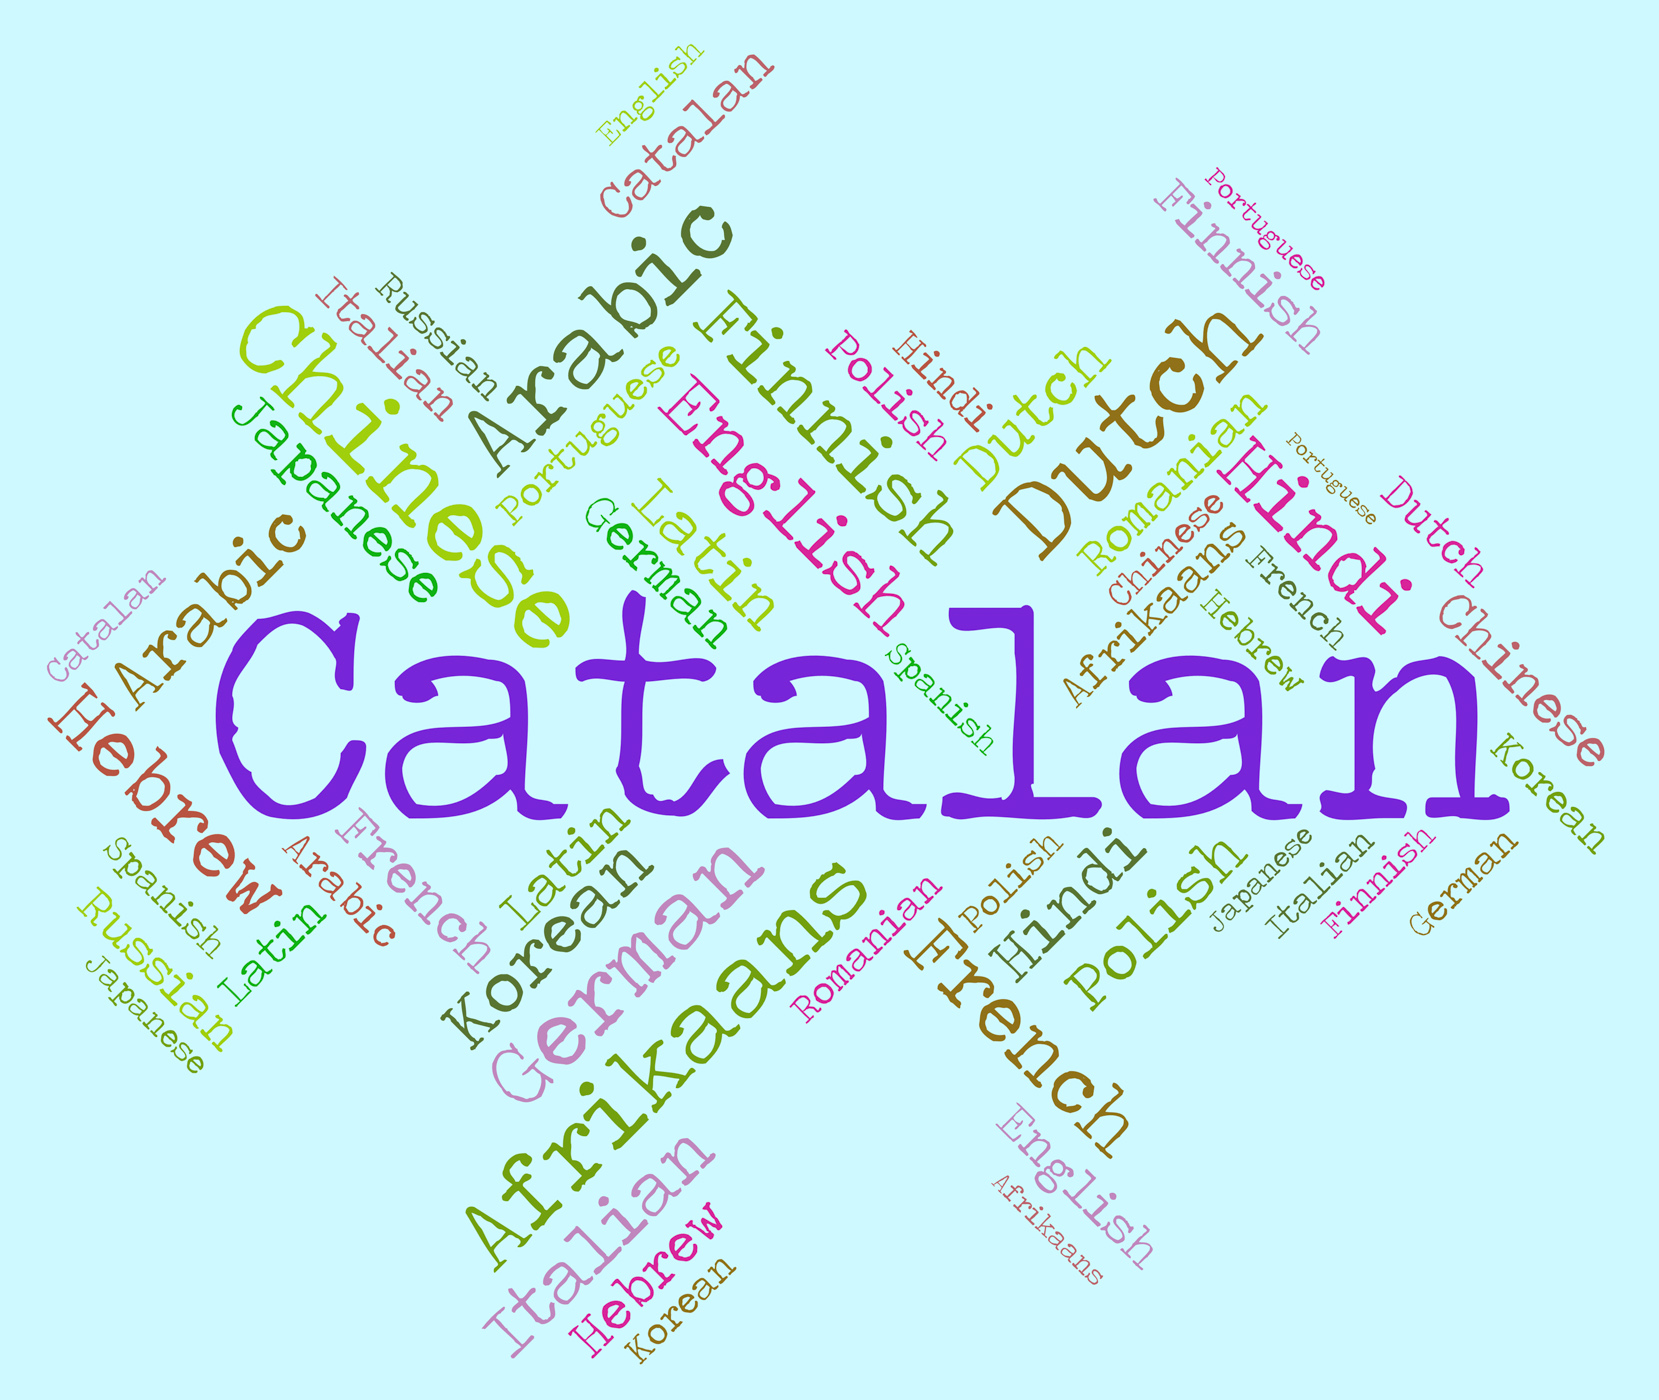 Catalan language means text catalonia and international photo